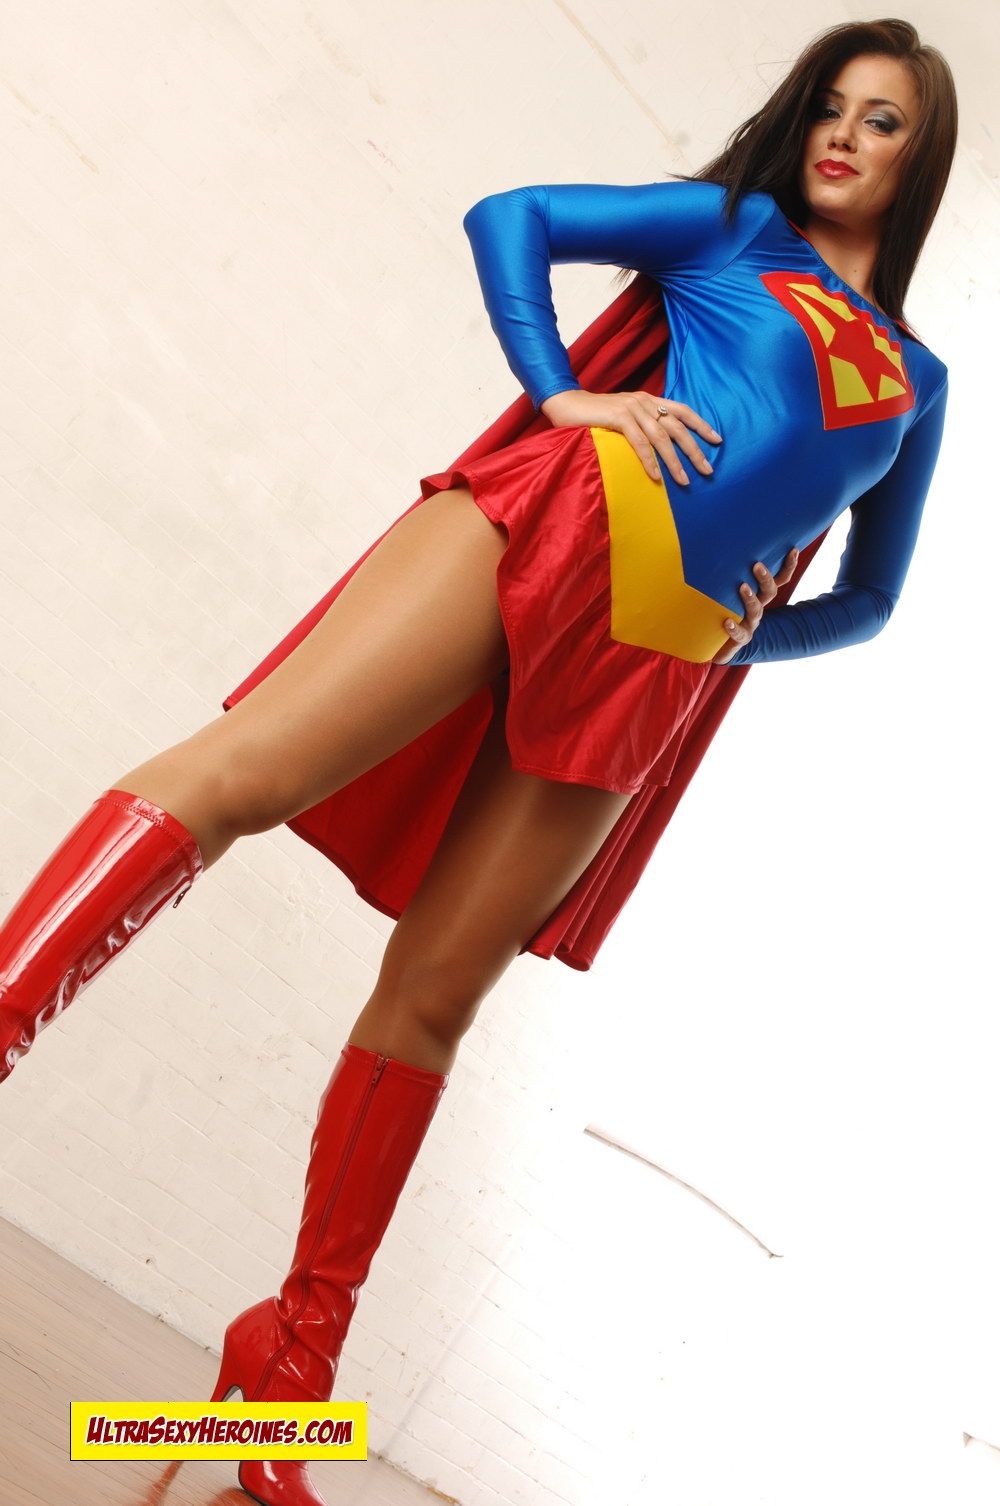 [UltraSexyHeroines] Super Heroine Cosplay Nude - Holly 74